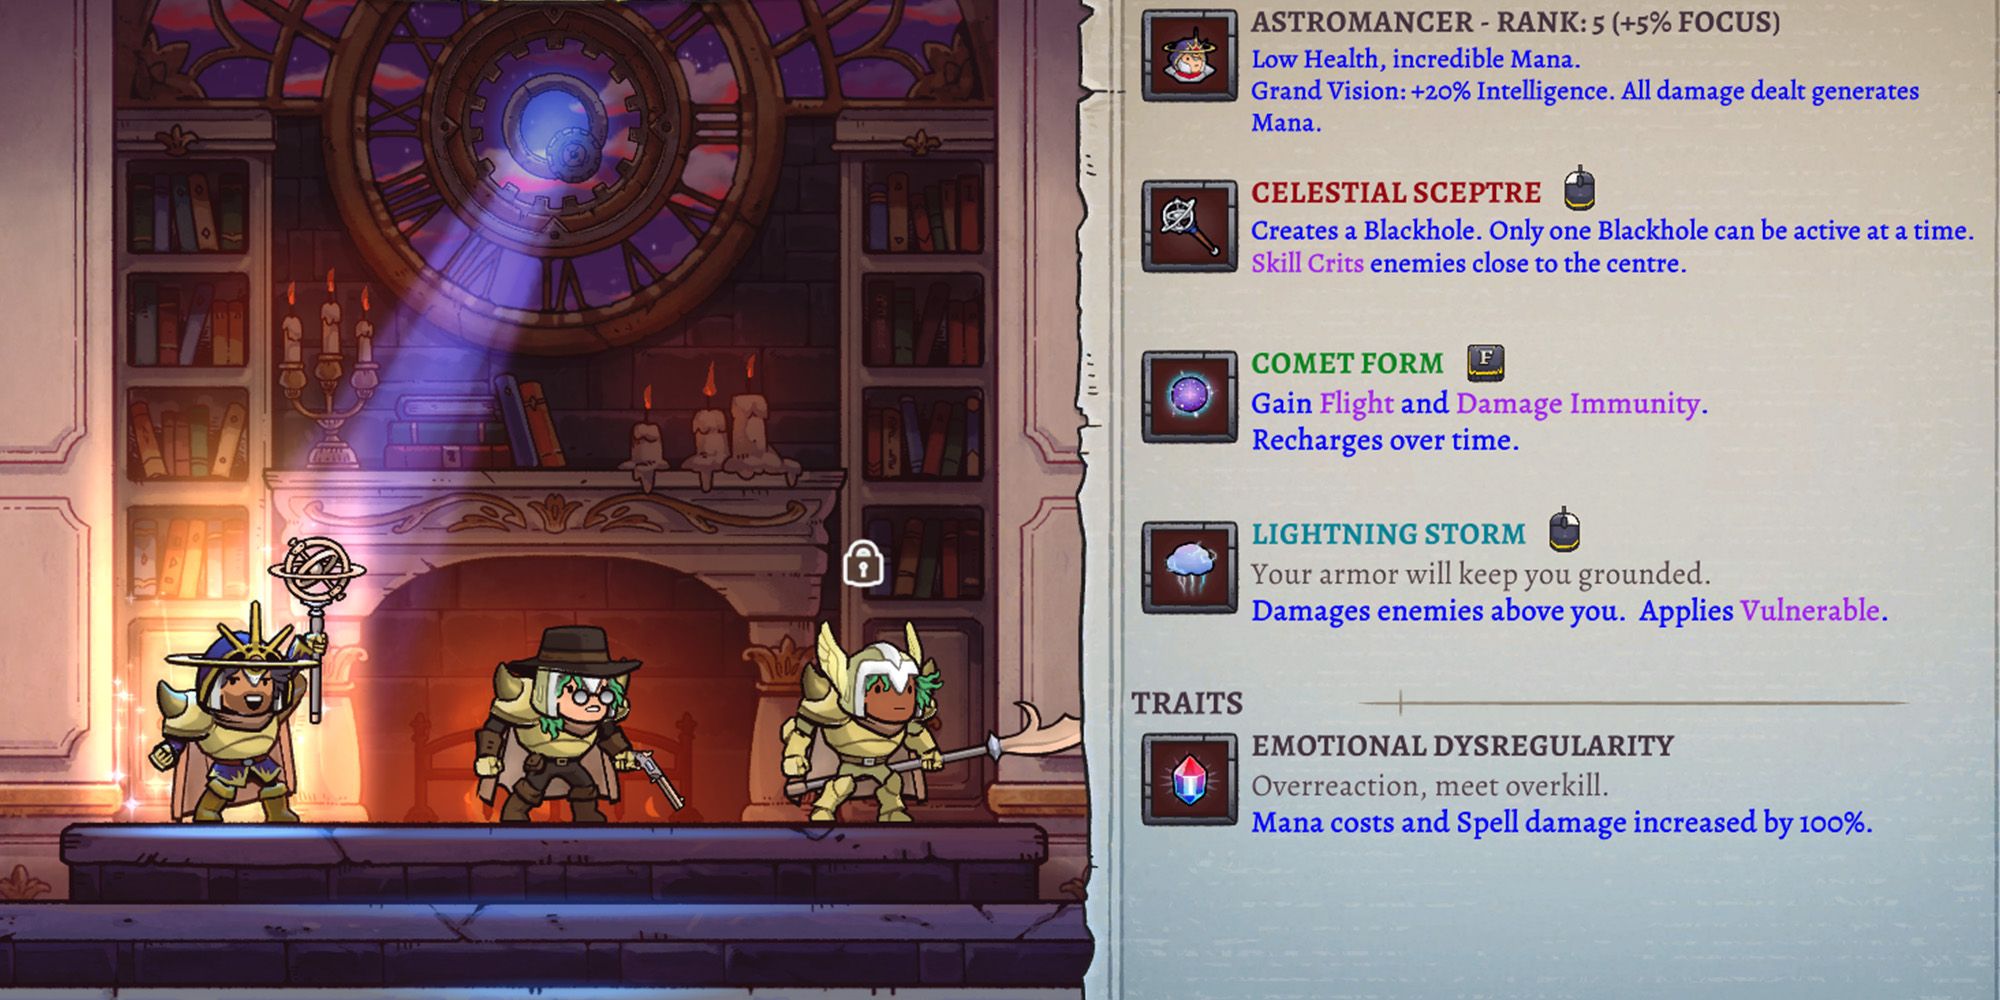 Rogue Legacy 2 screenshot of Astromancer with the Emotional Dysregularity trait